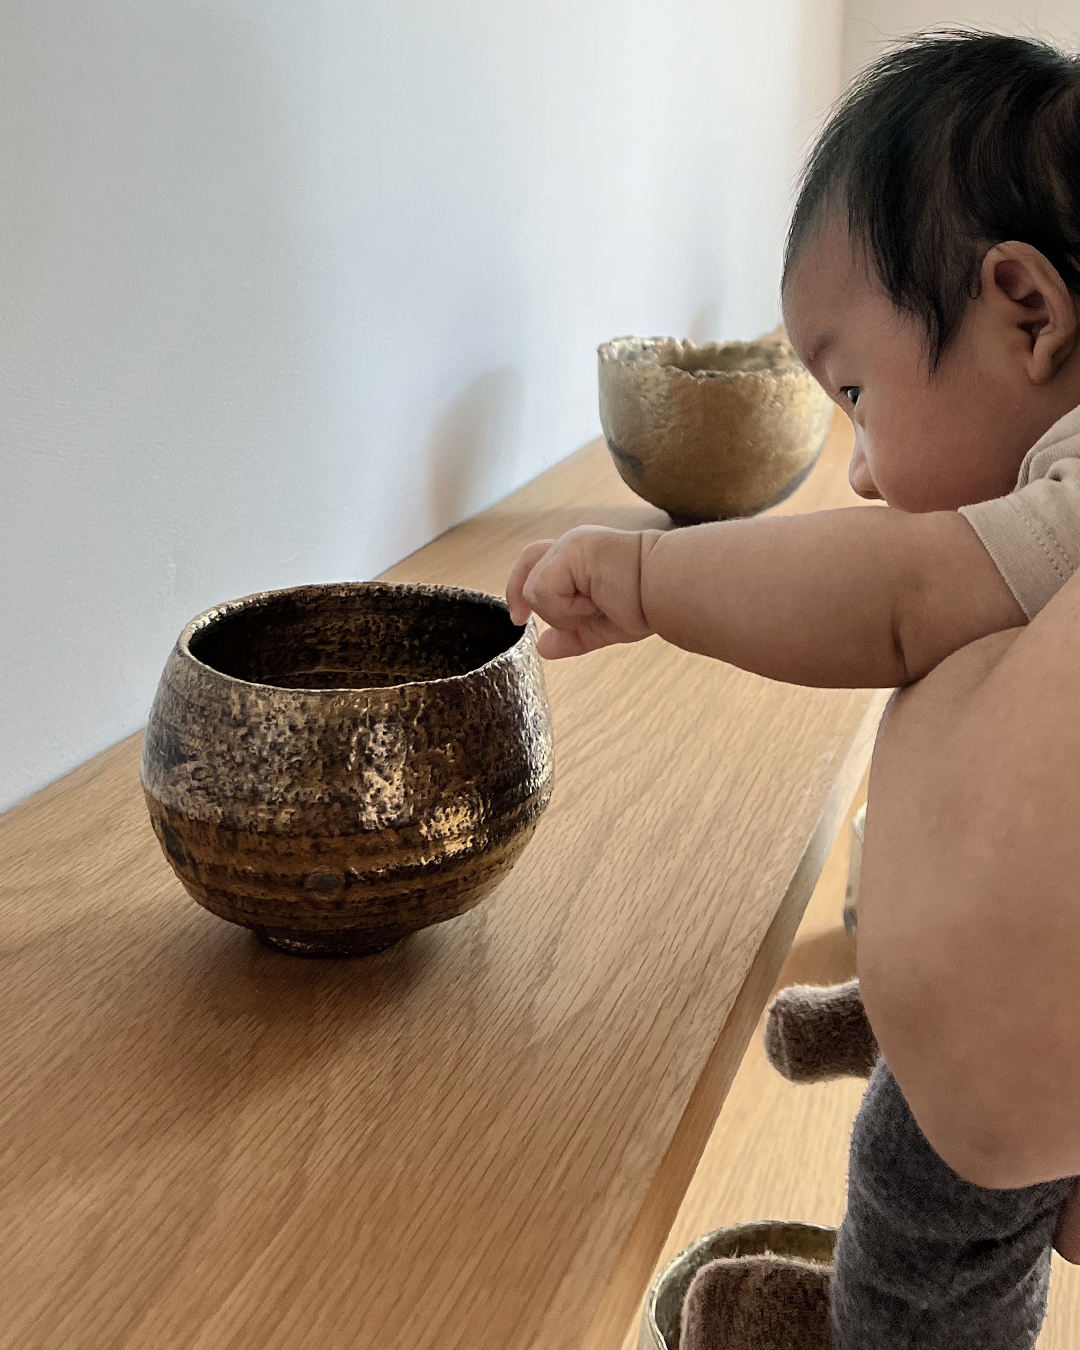 Gold chawan on display on wood shelf and baby touching it with one hand